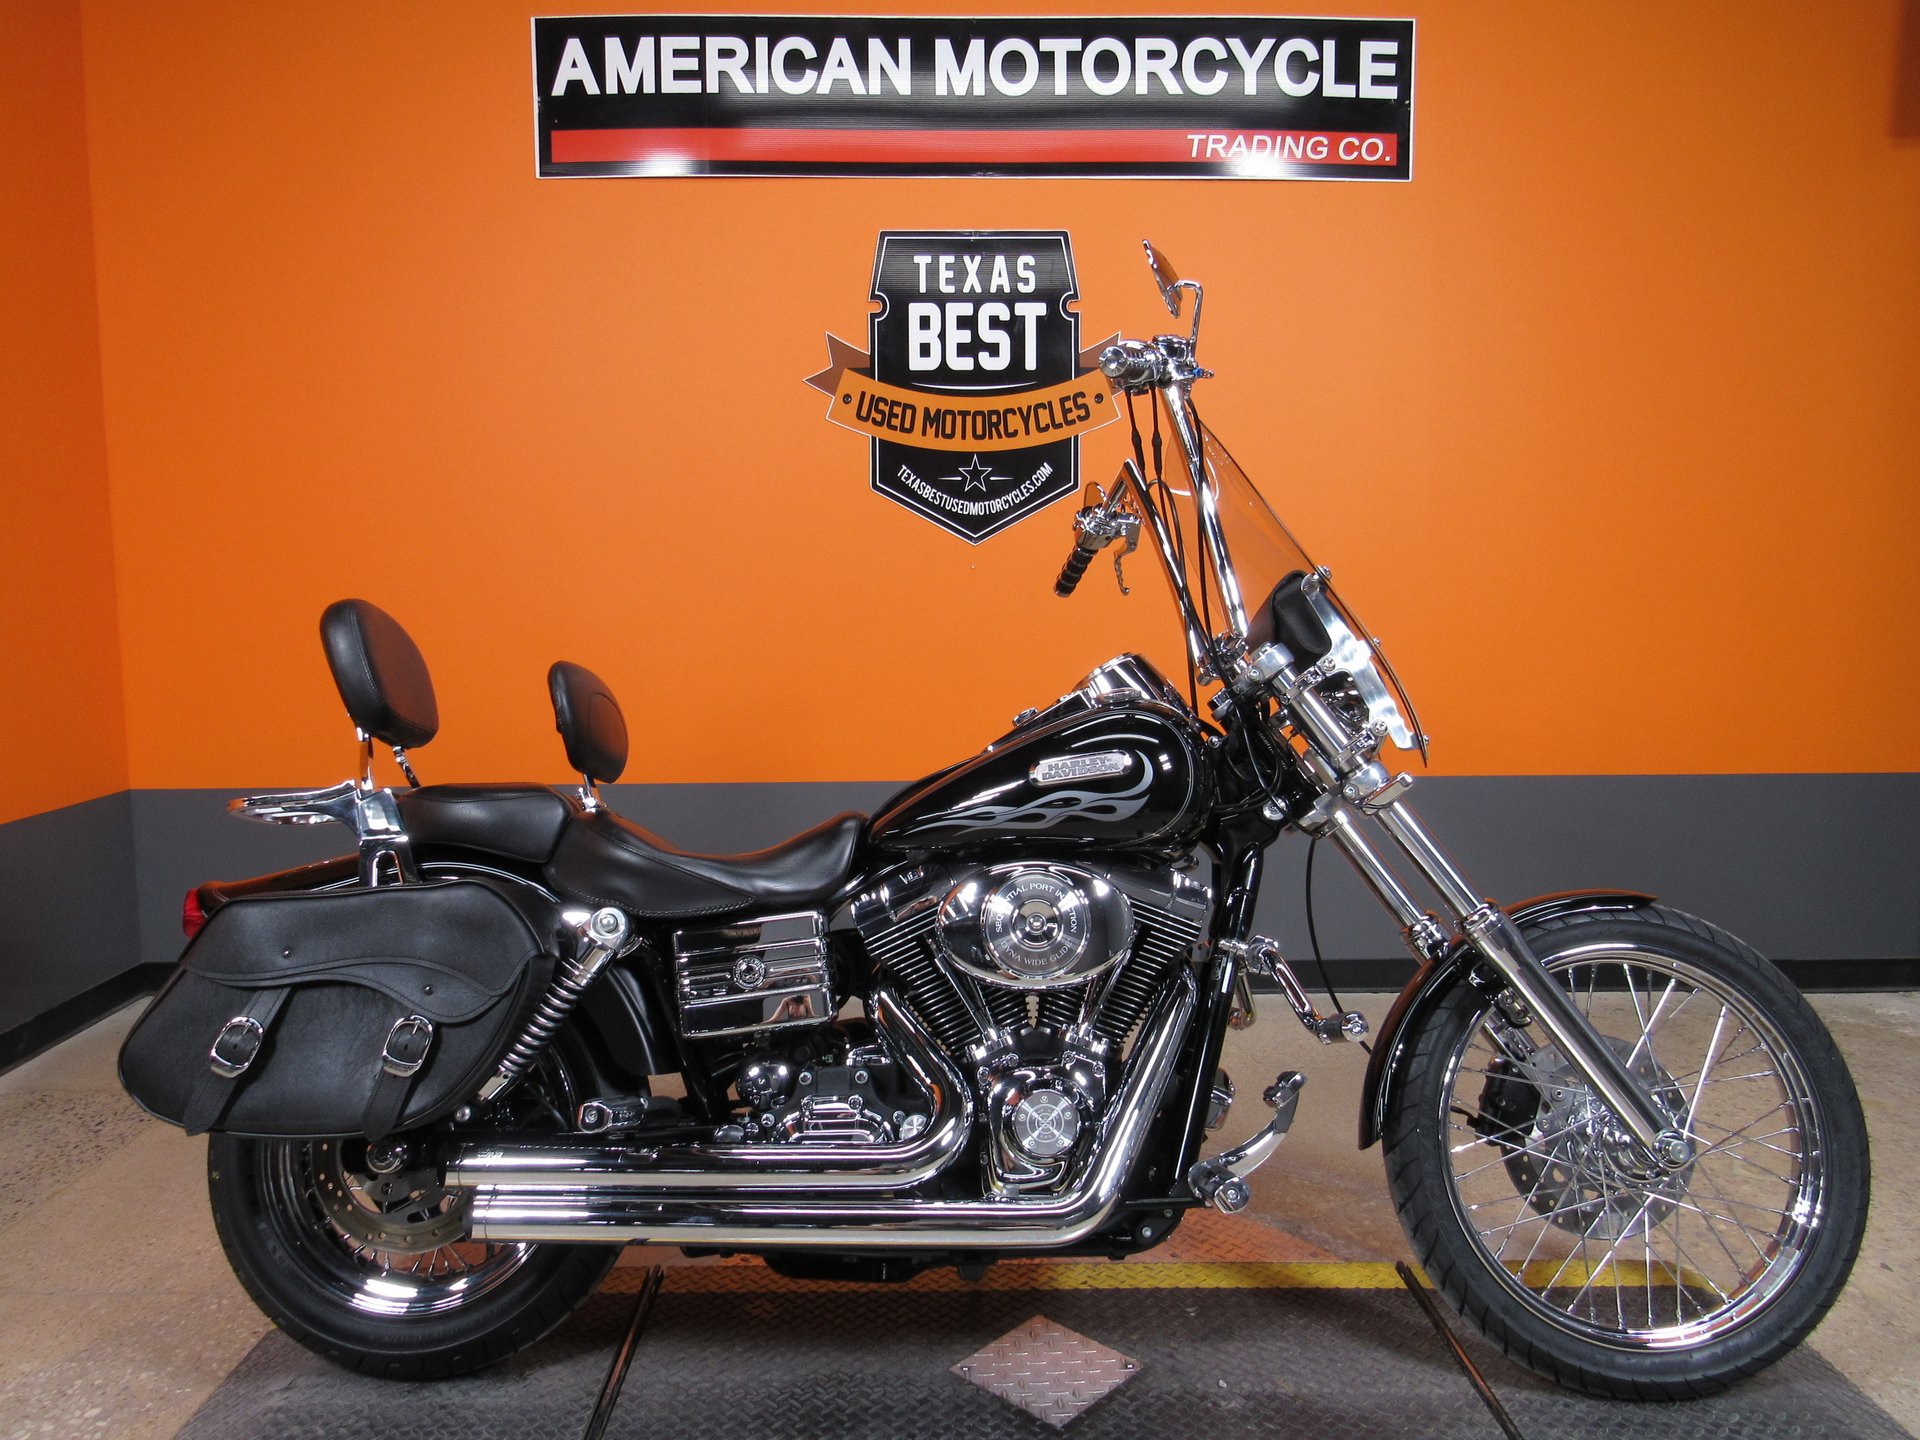 2006 Harley-Davidson Dyna Wide Glide | American Motorcycle Trading ...